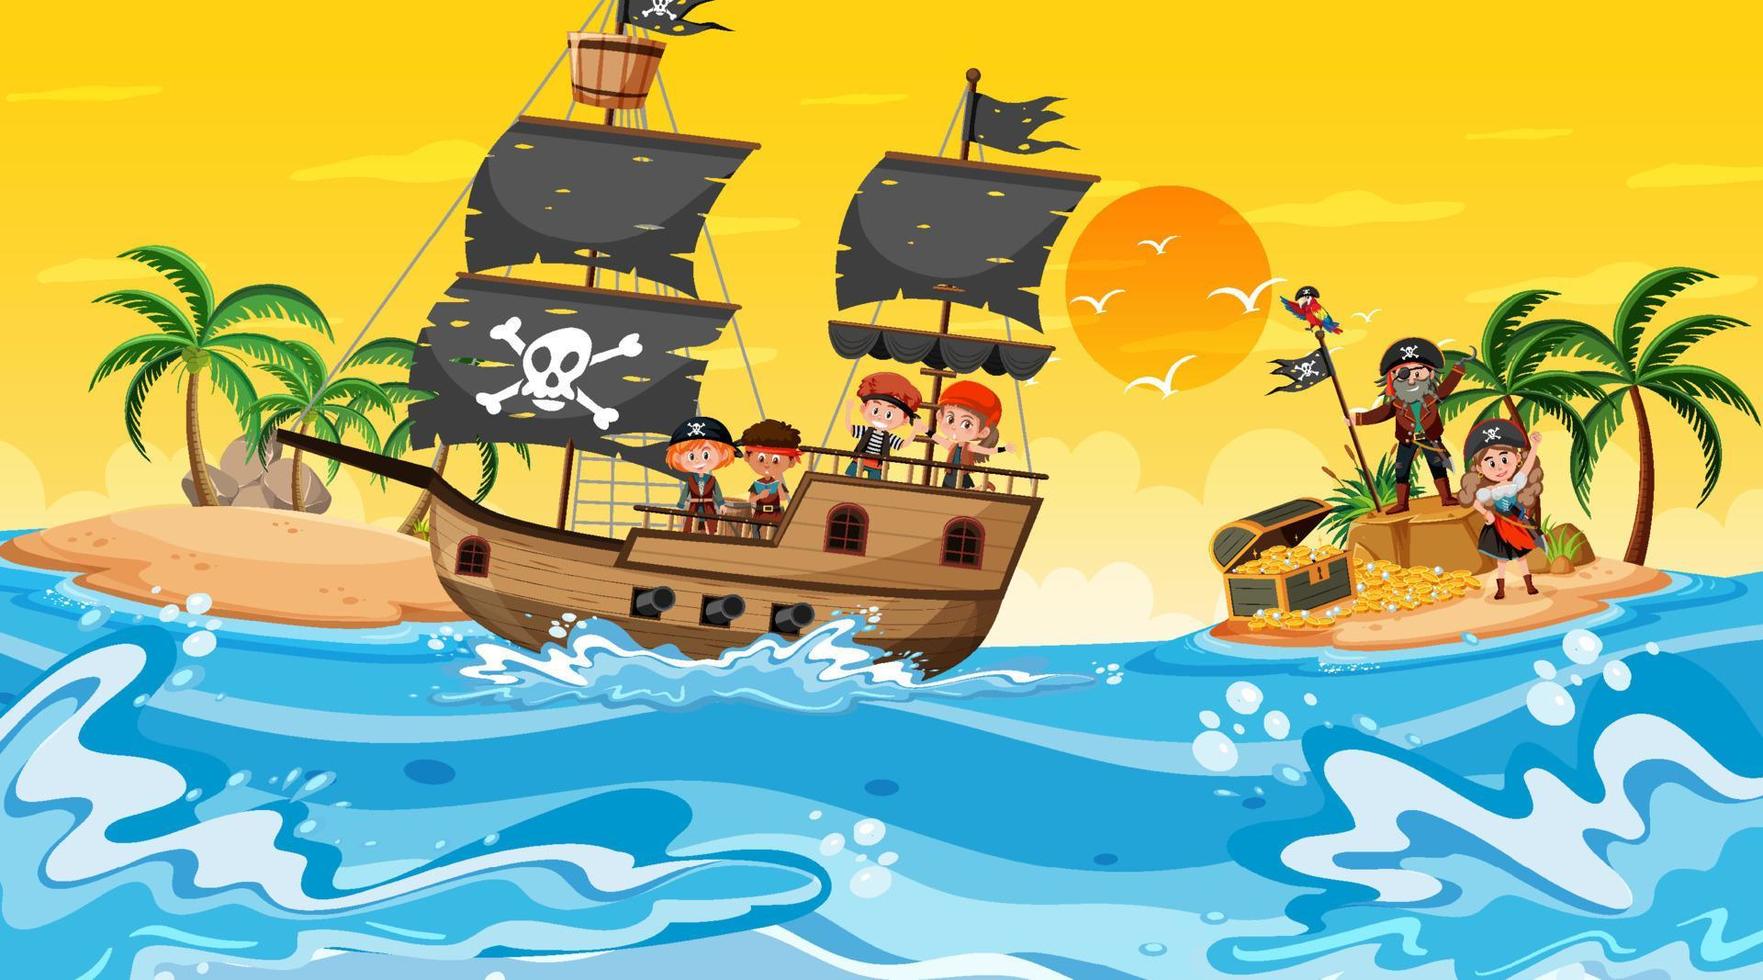 Treasure Island scene at sunset time with Pirate kids on the ship vector